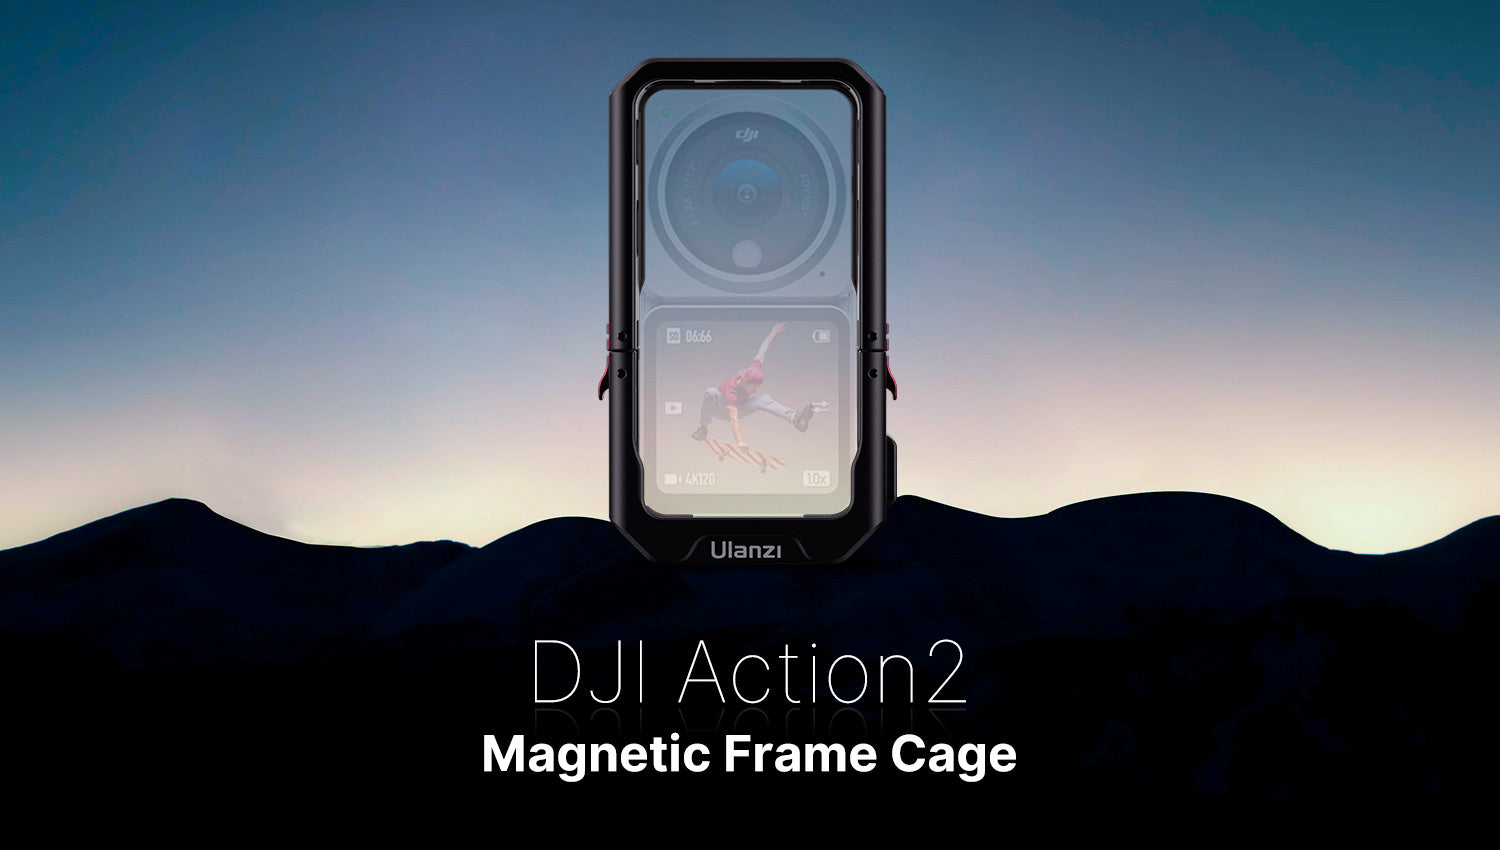 Ulanzi Magnetic Frame Cage for DJI Action 2